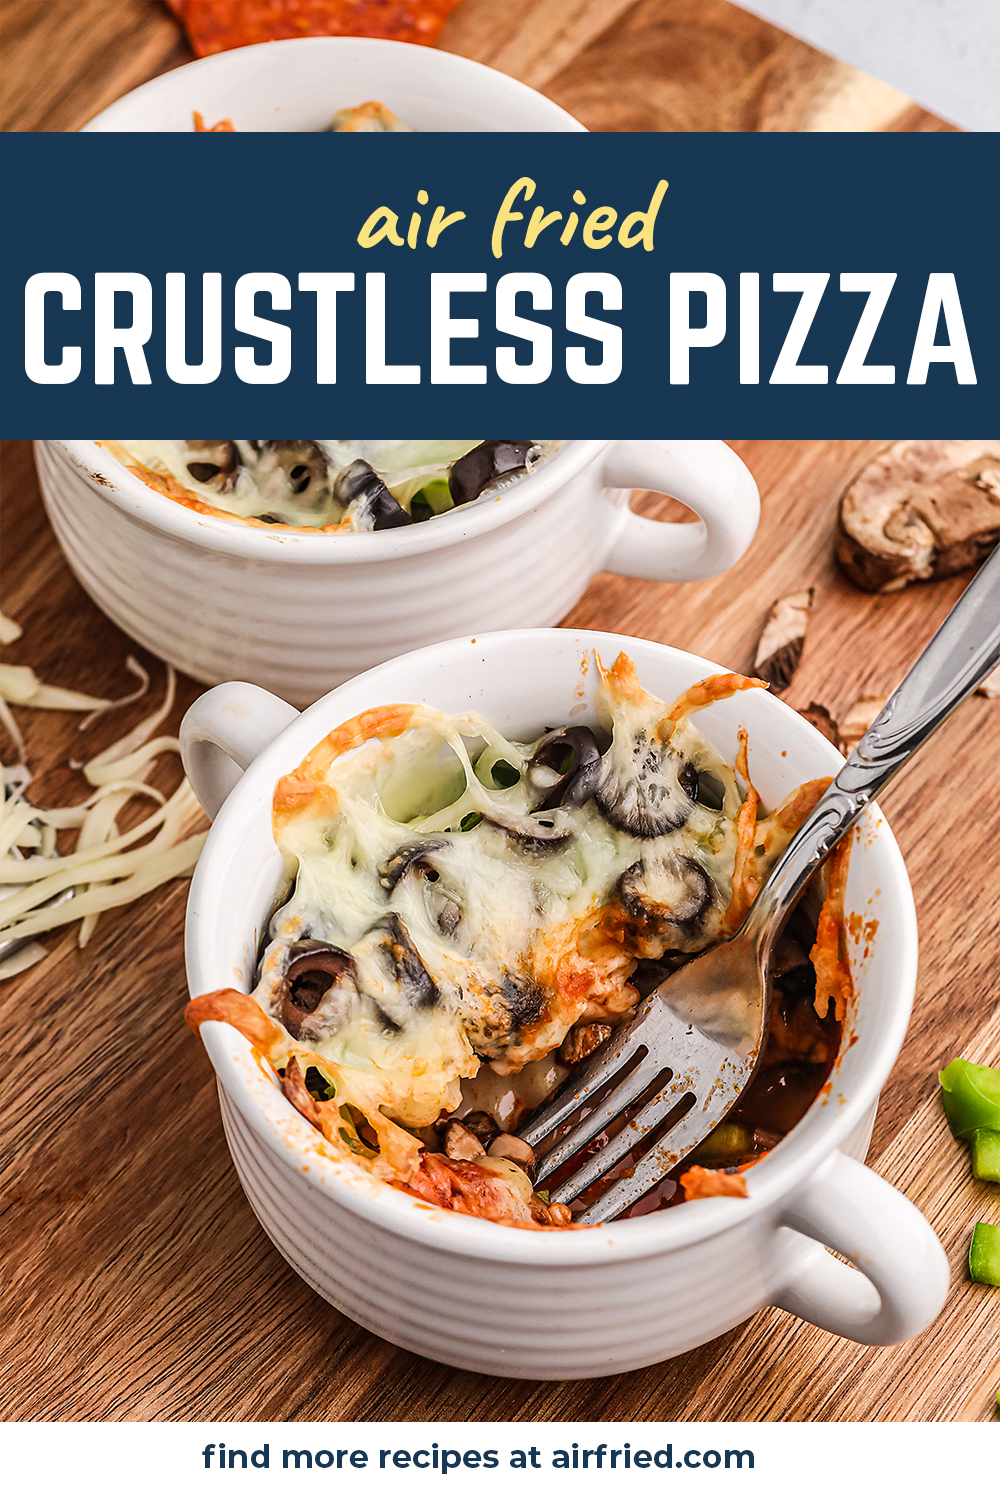 This low carb, crustless pizza is a great dish to get all the best parts of a pizza in a keto friendly meal!